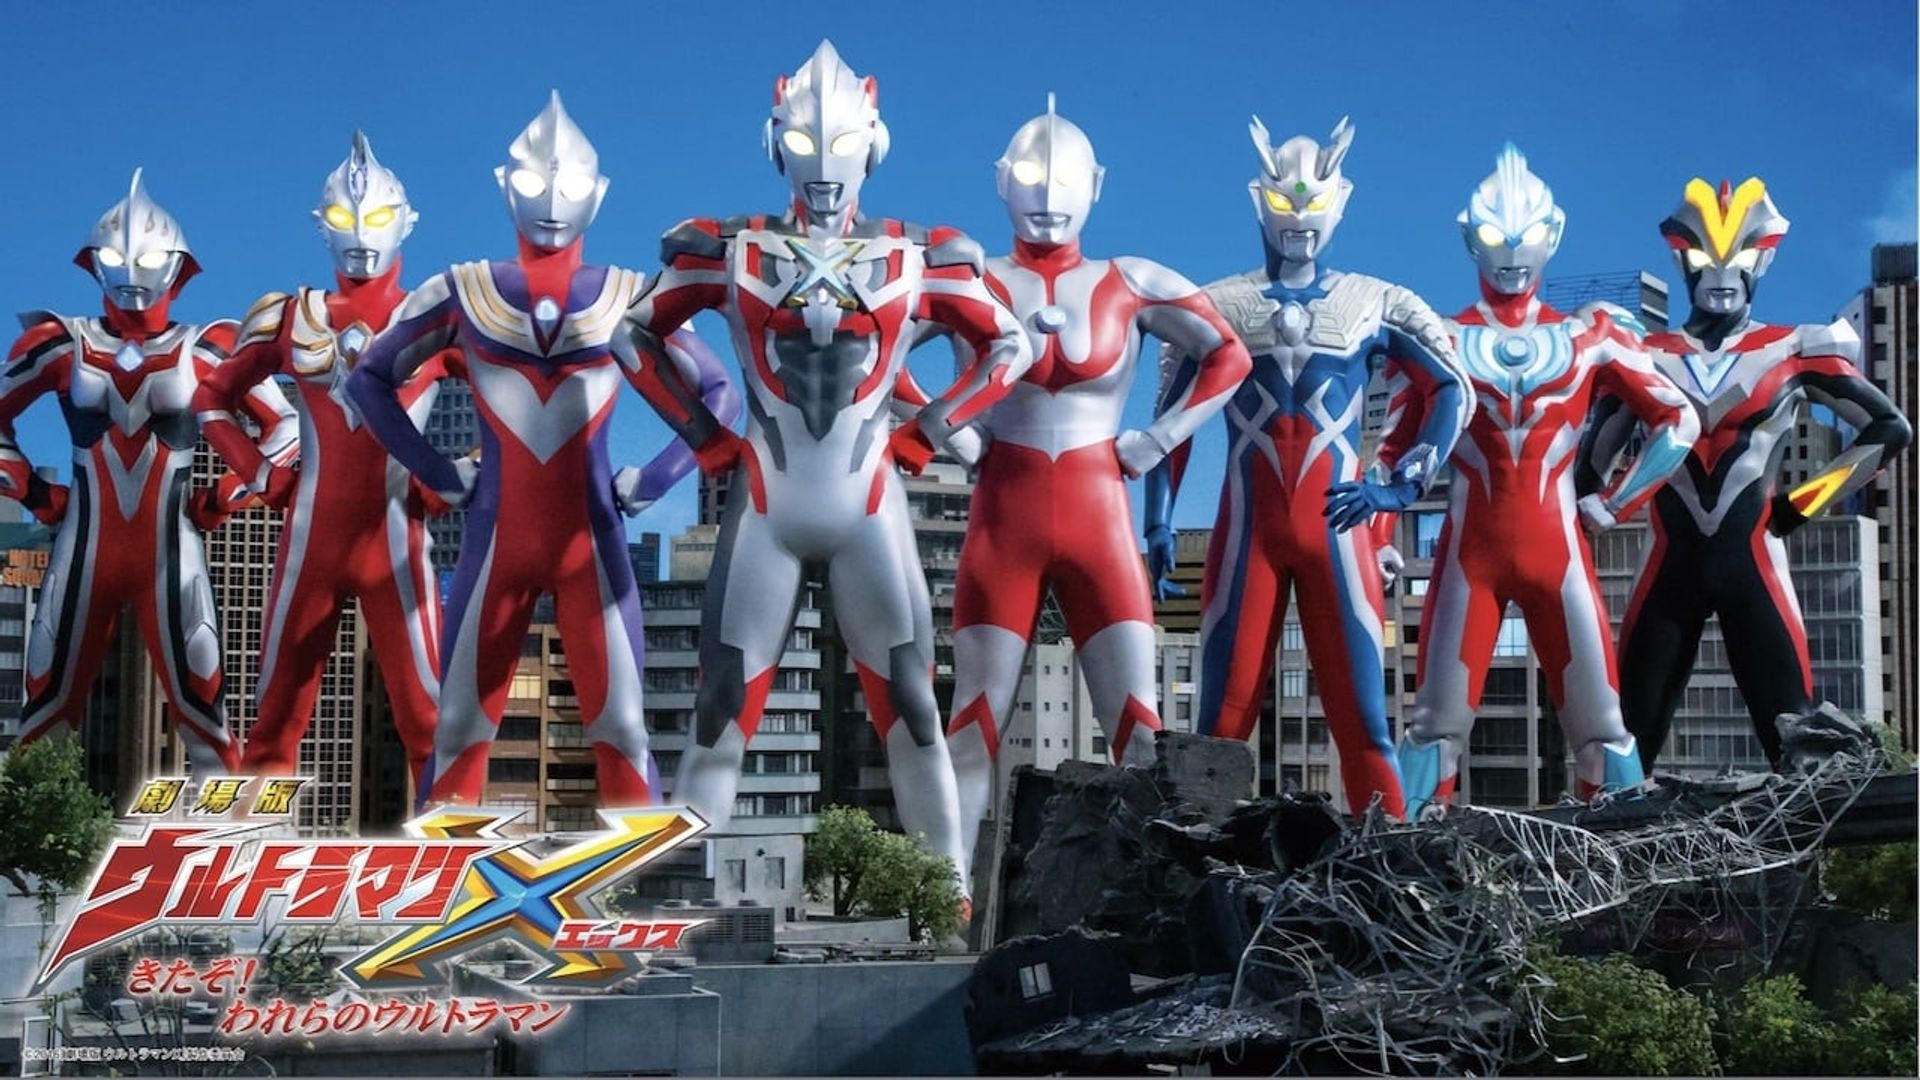 Ultraman X: Here He Comes! Our Ultraman background